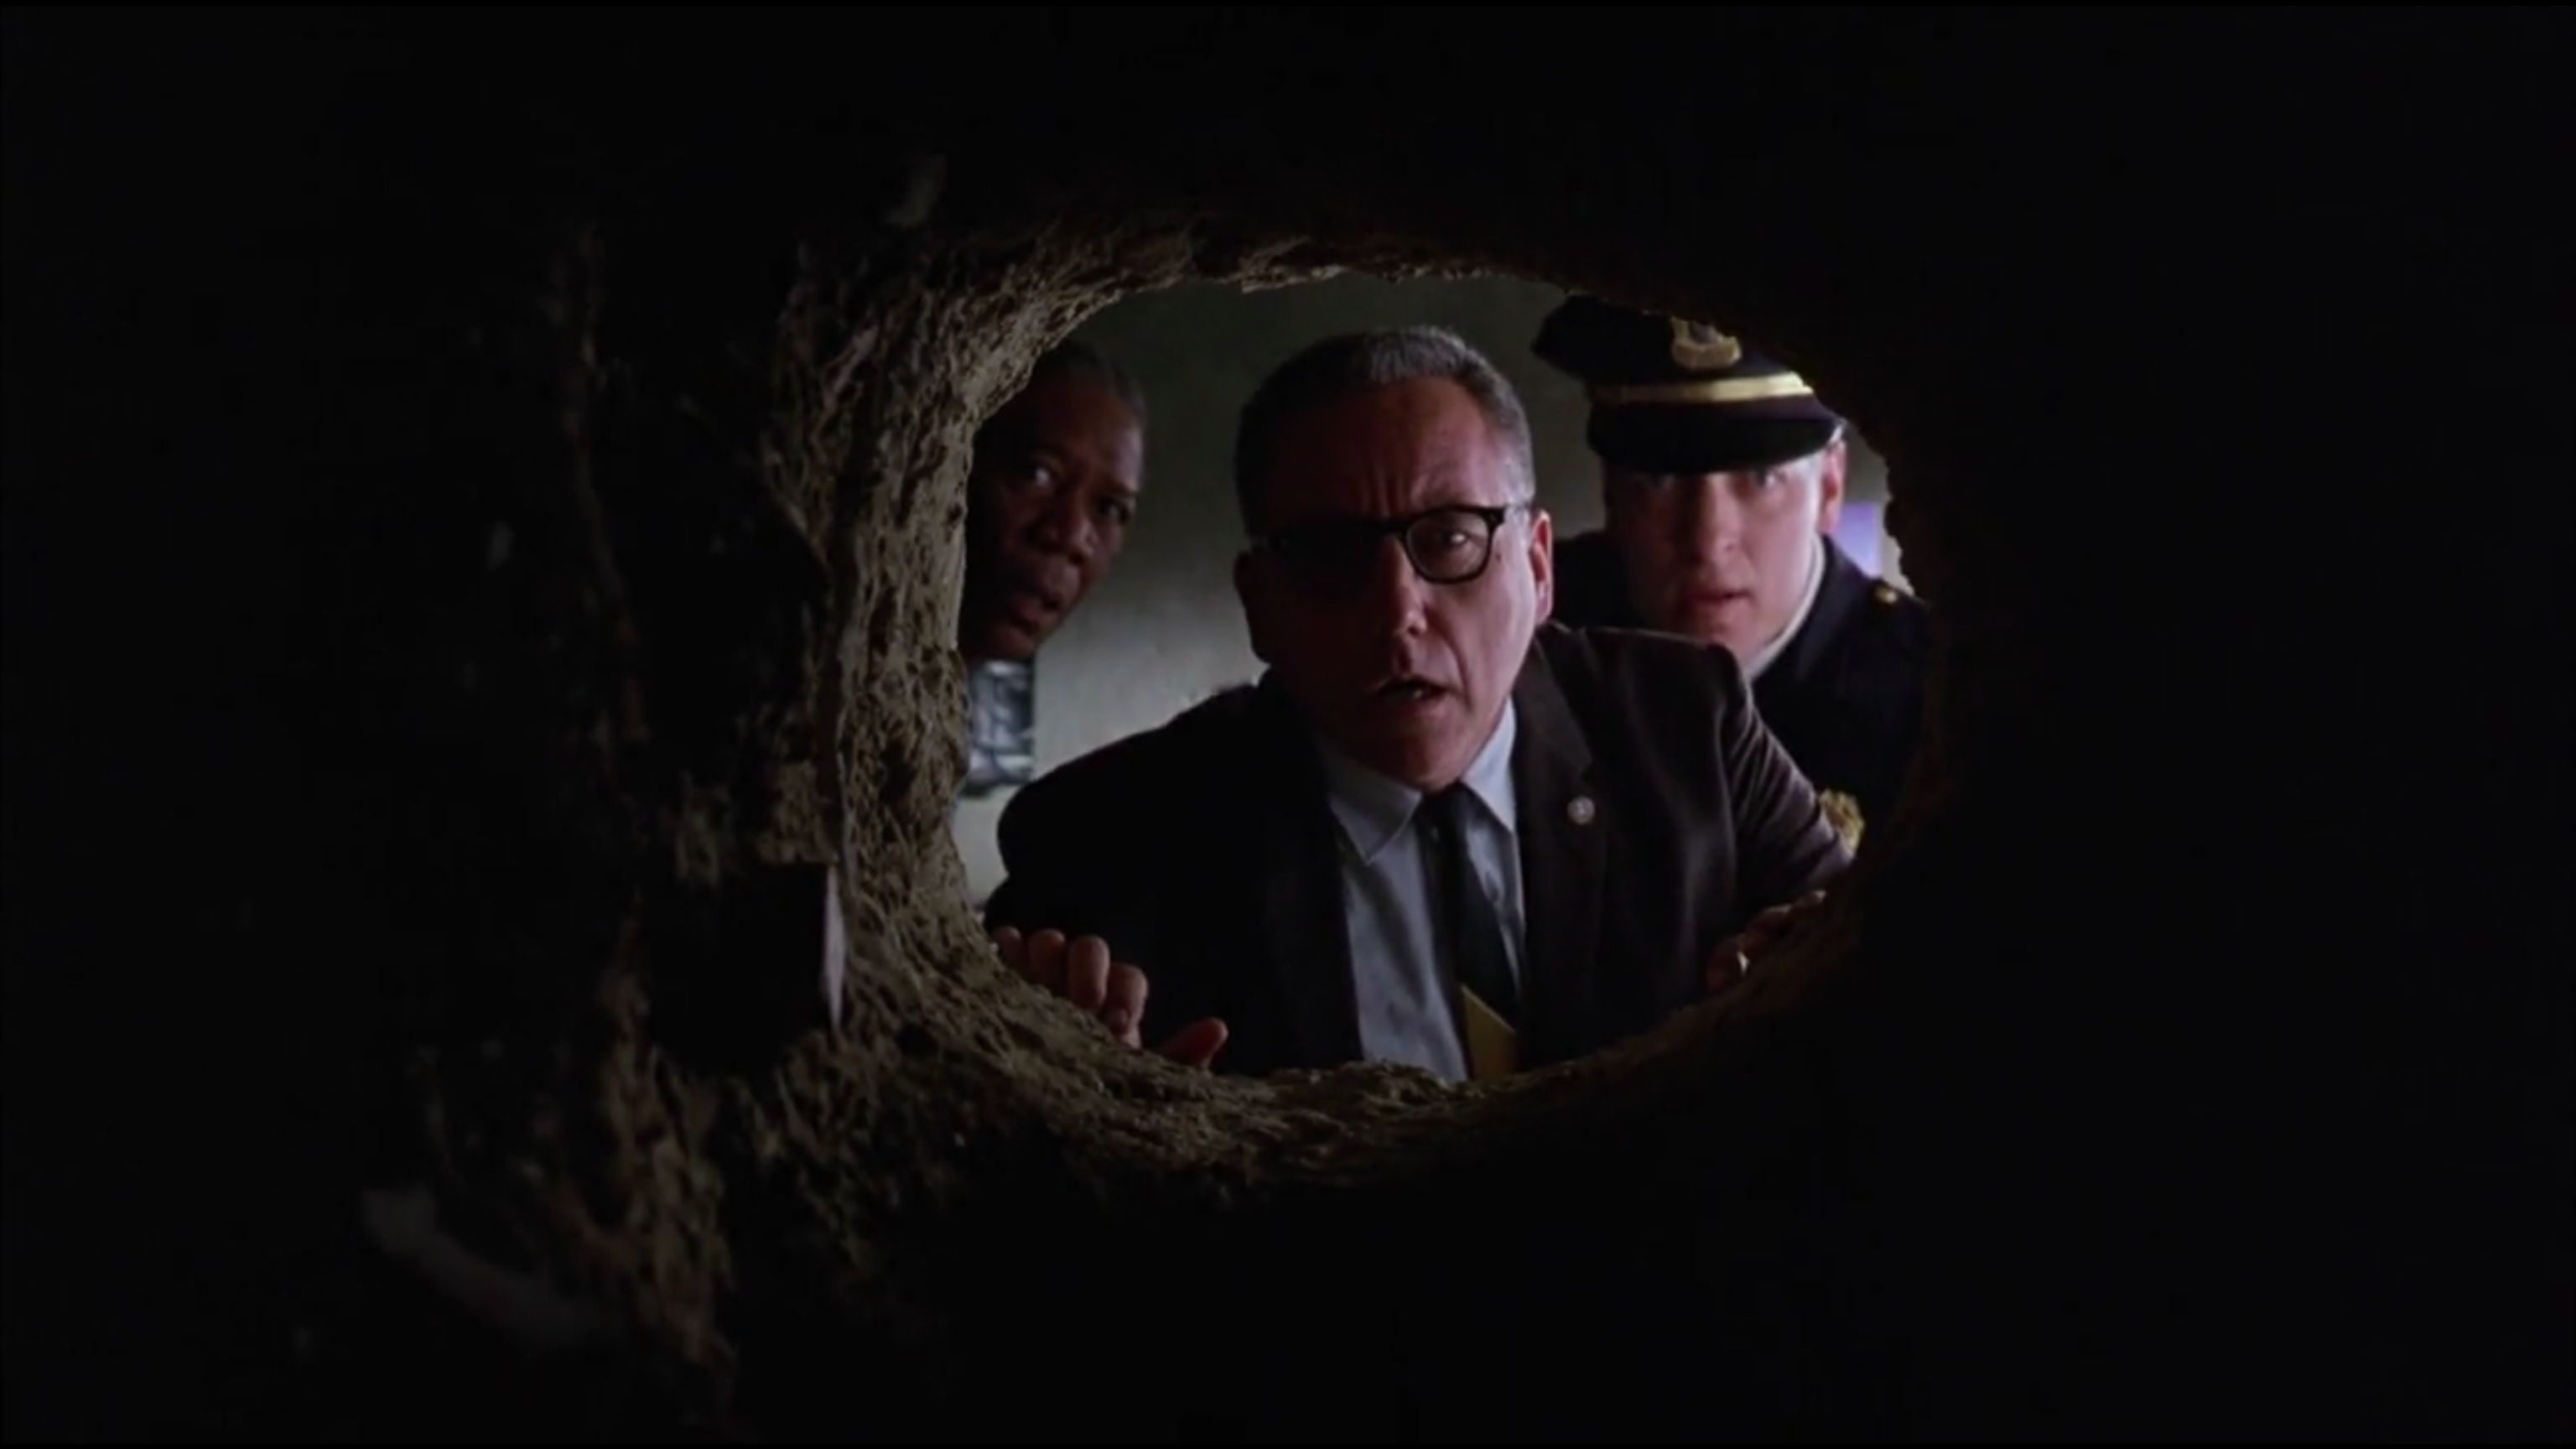  Andy Dufresne 'escapes' The Shawshank prison